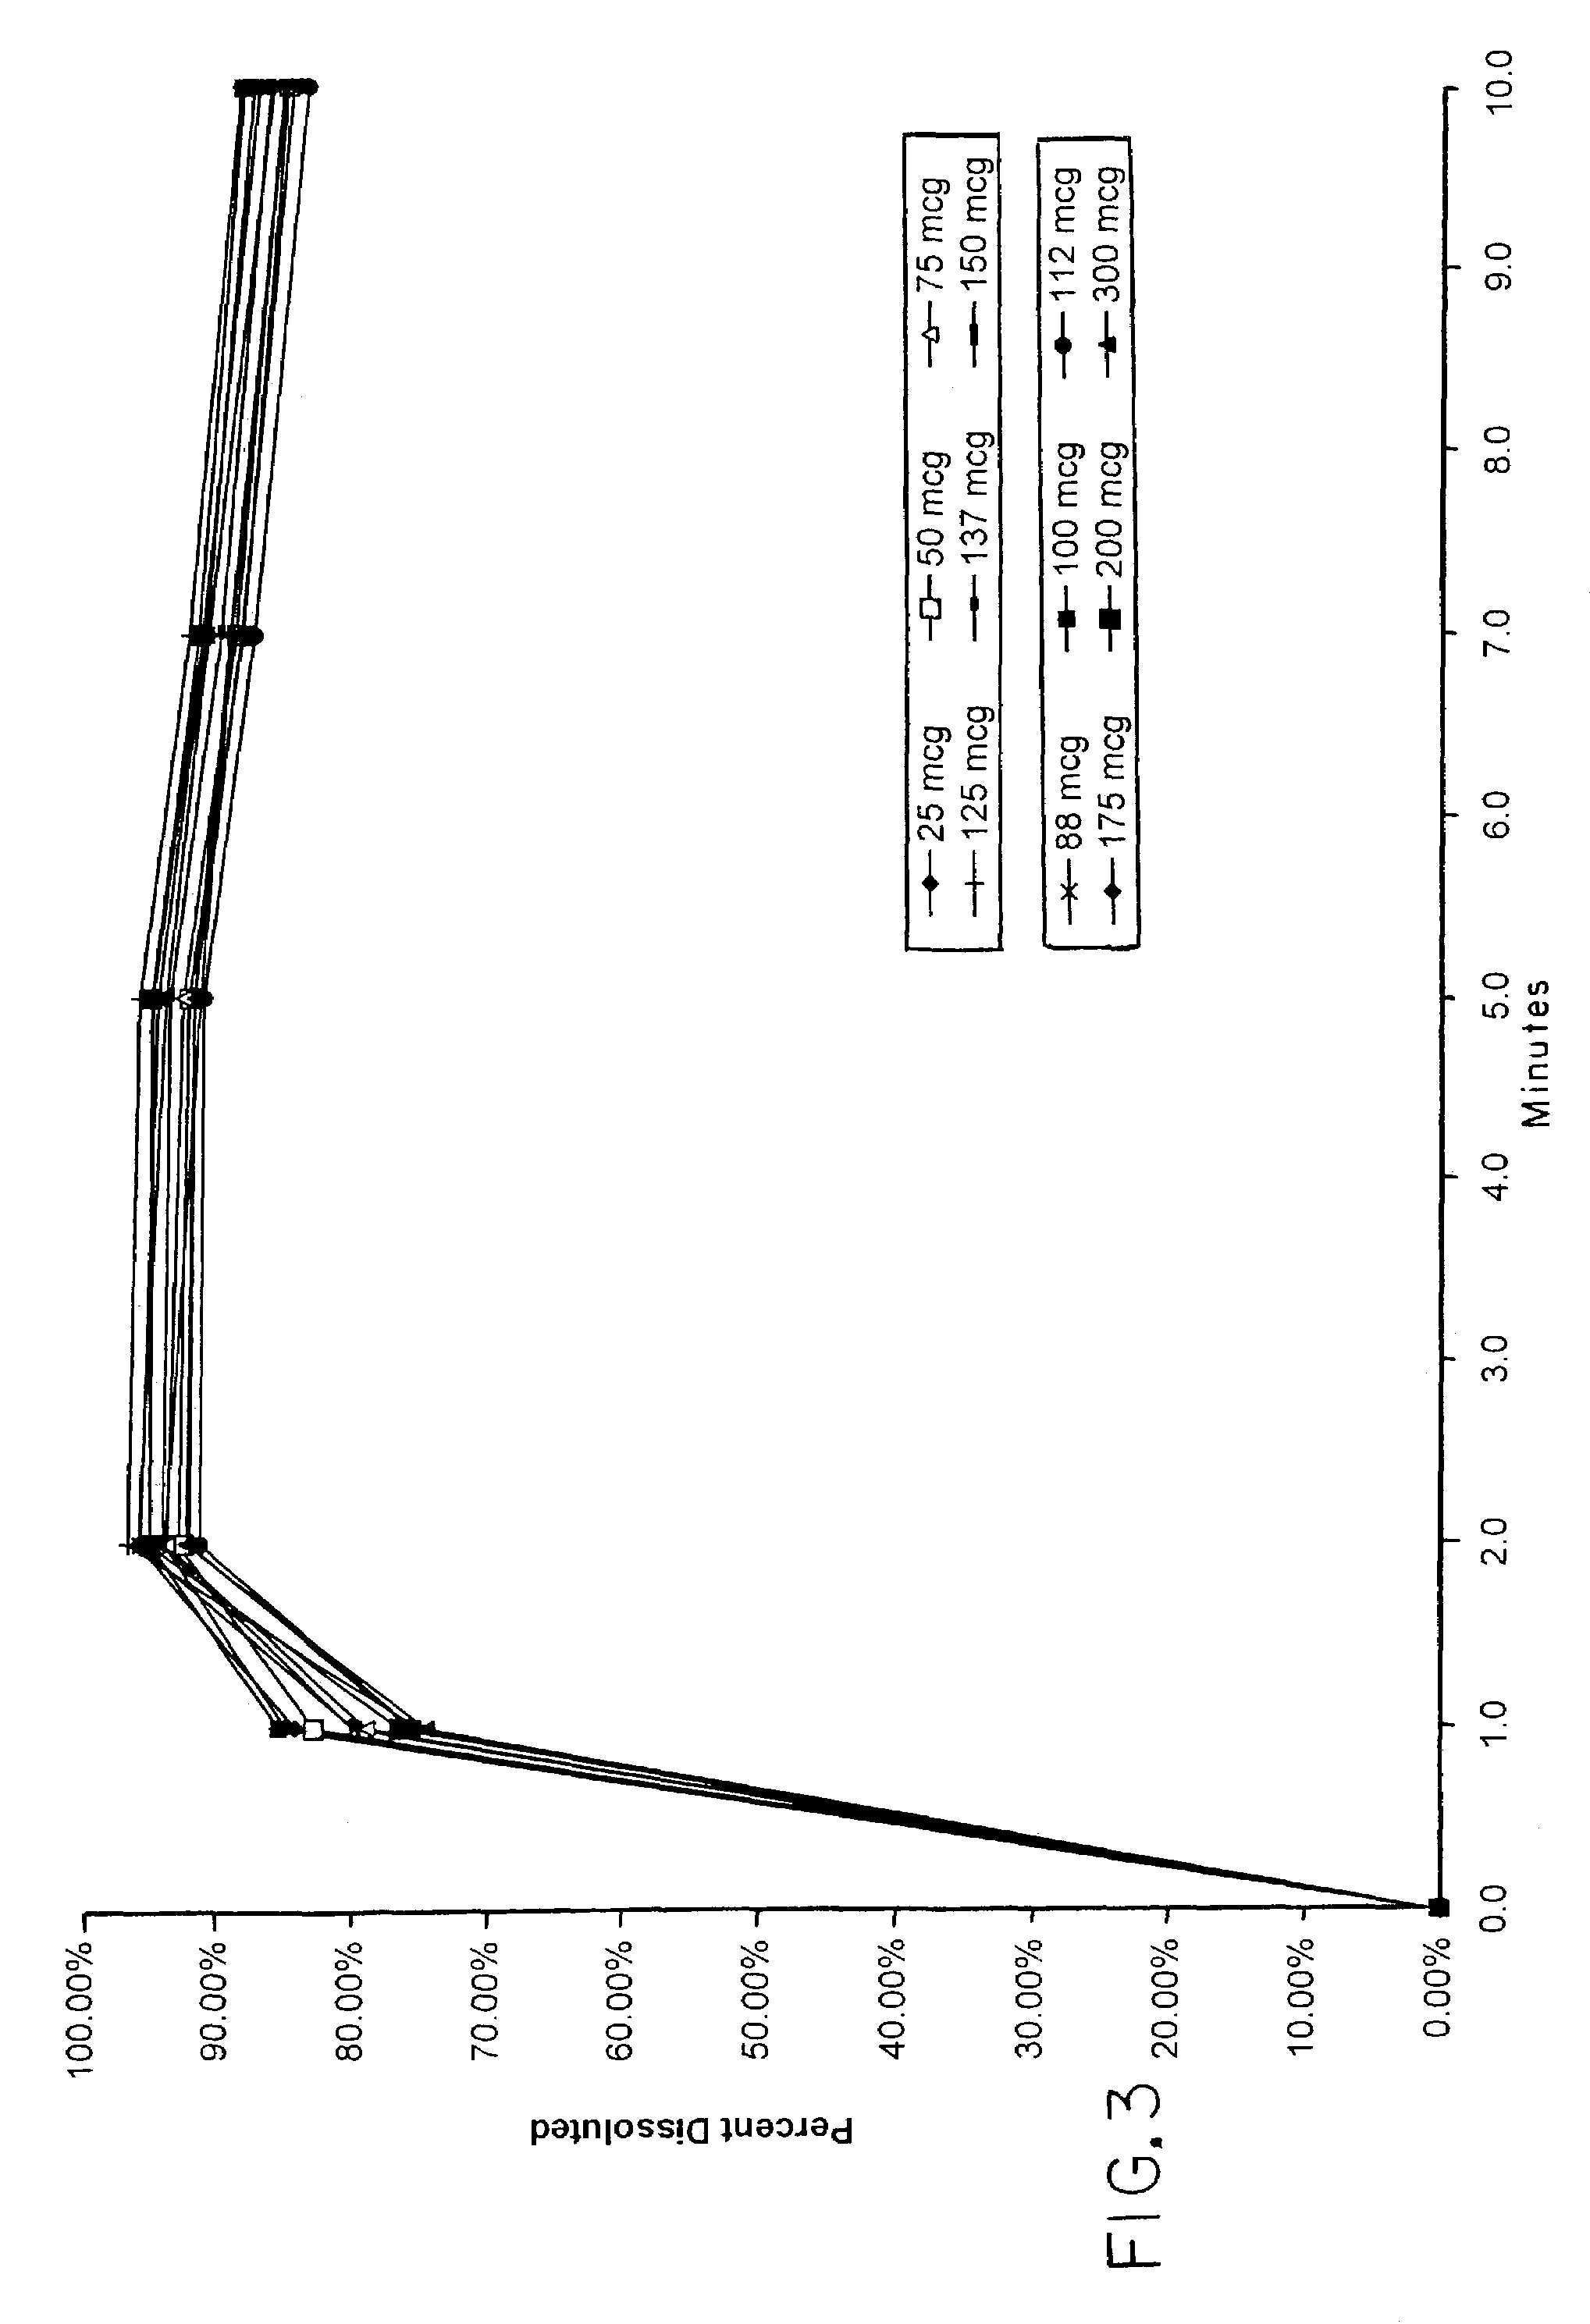 Methods of administering levothyroxine pharmaceutical compositions